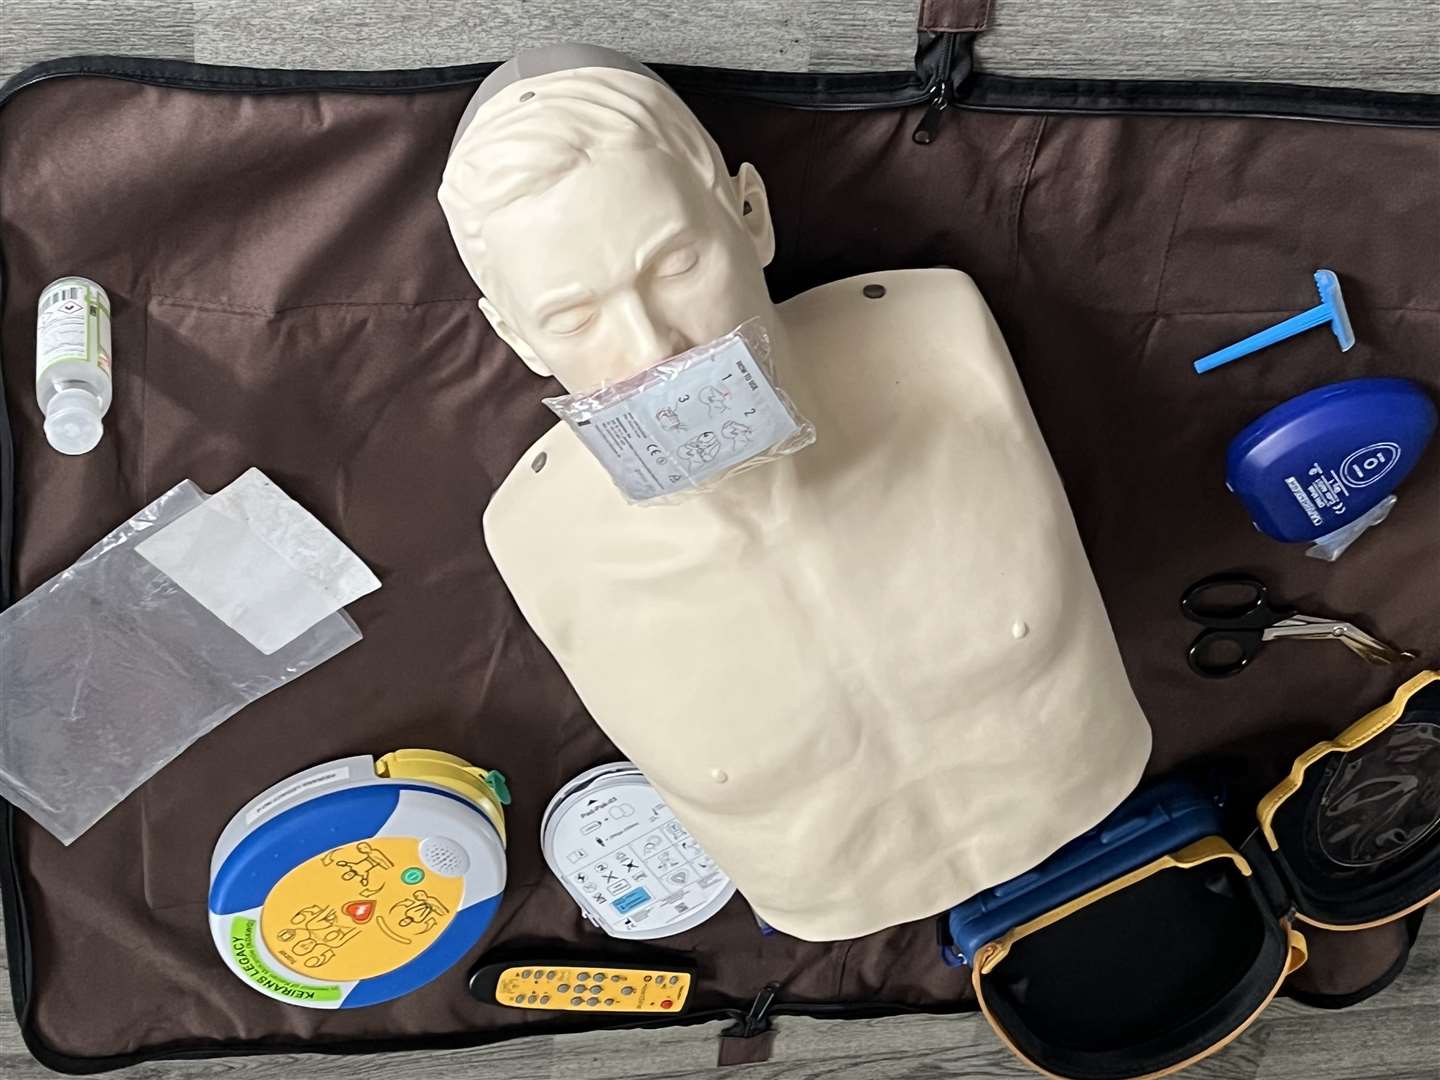 The contents of the defibrillator casing include the defib', child and adult pads, a mouth shield for mouth-to-mouth resuscitation, a razor in case shaving is required, and a pair of scissors to cut clothing.